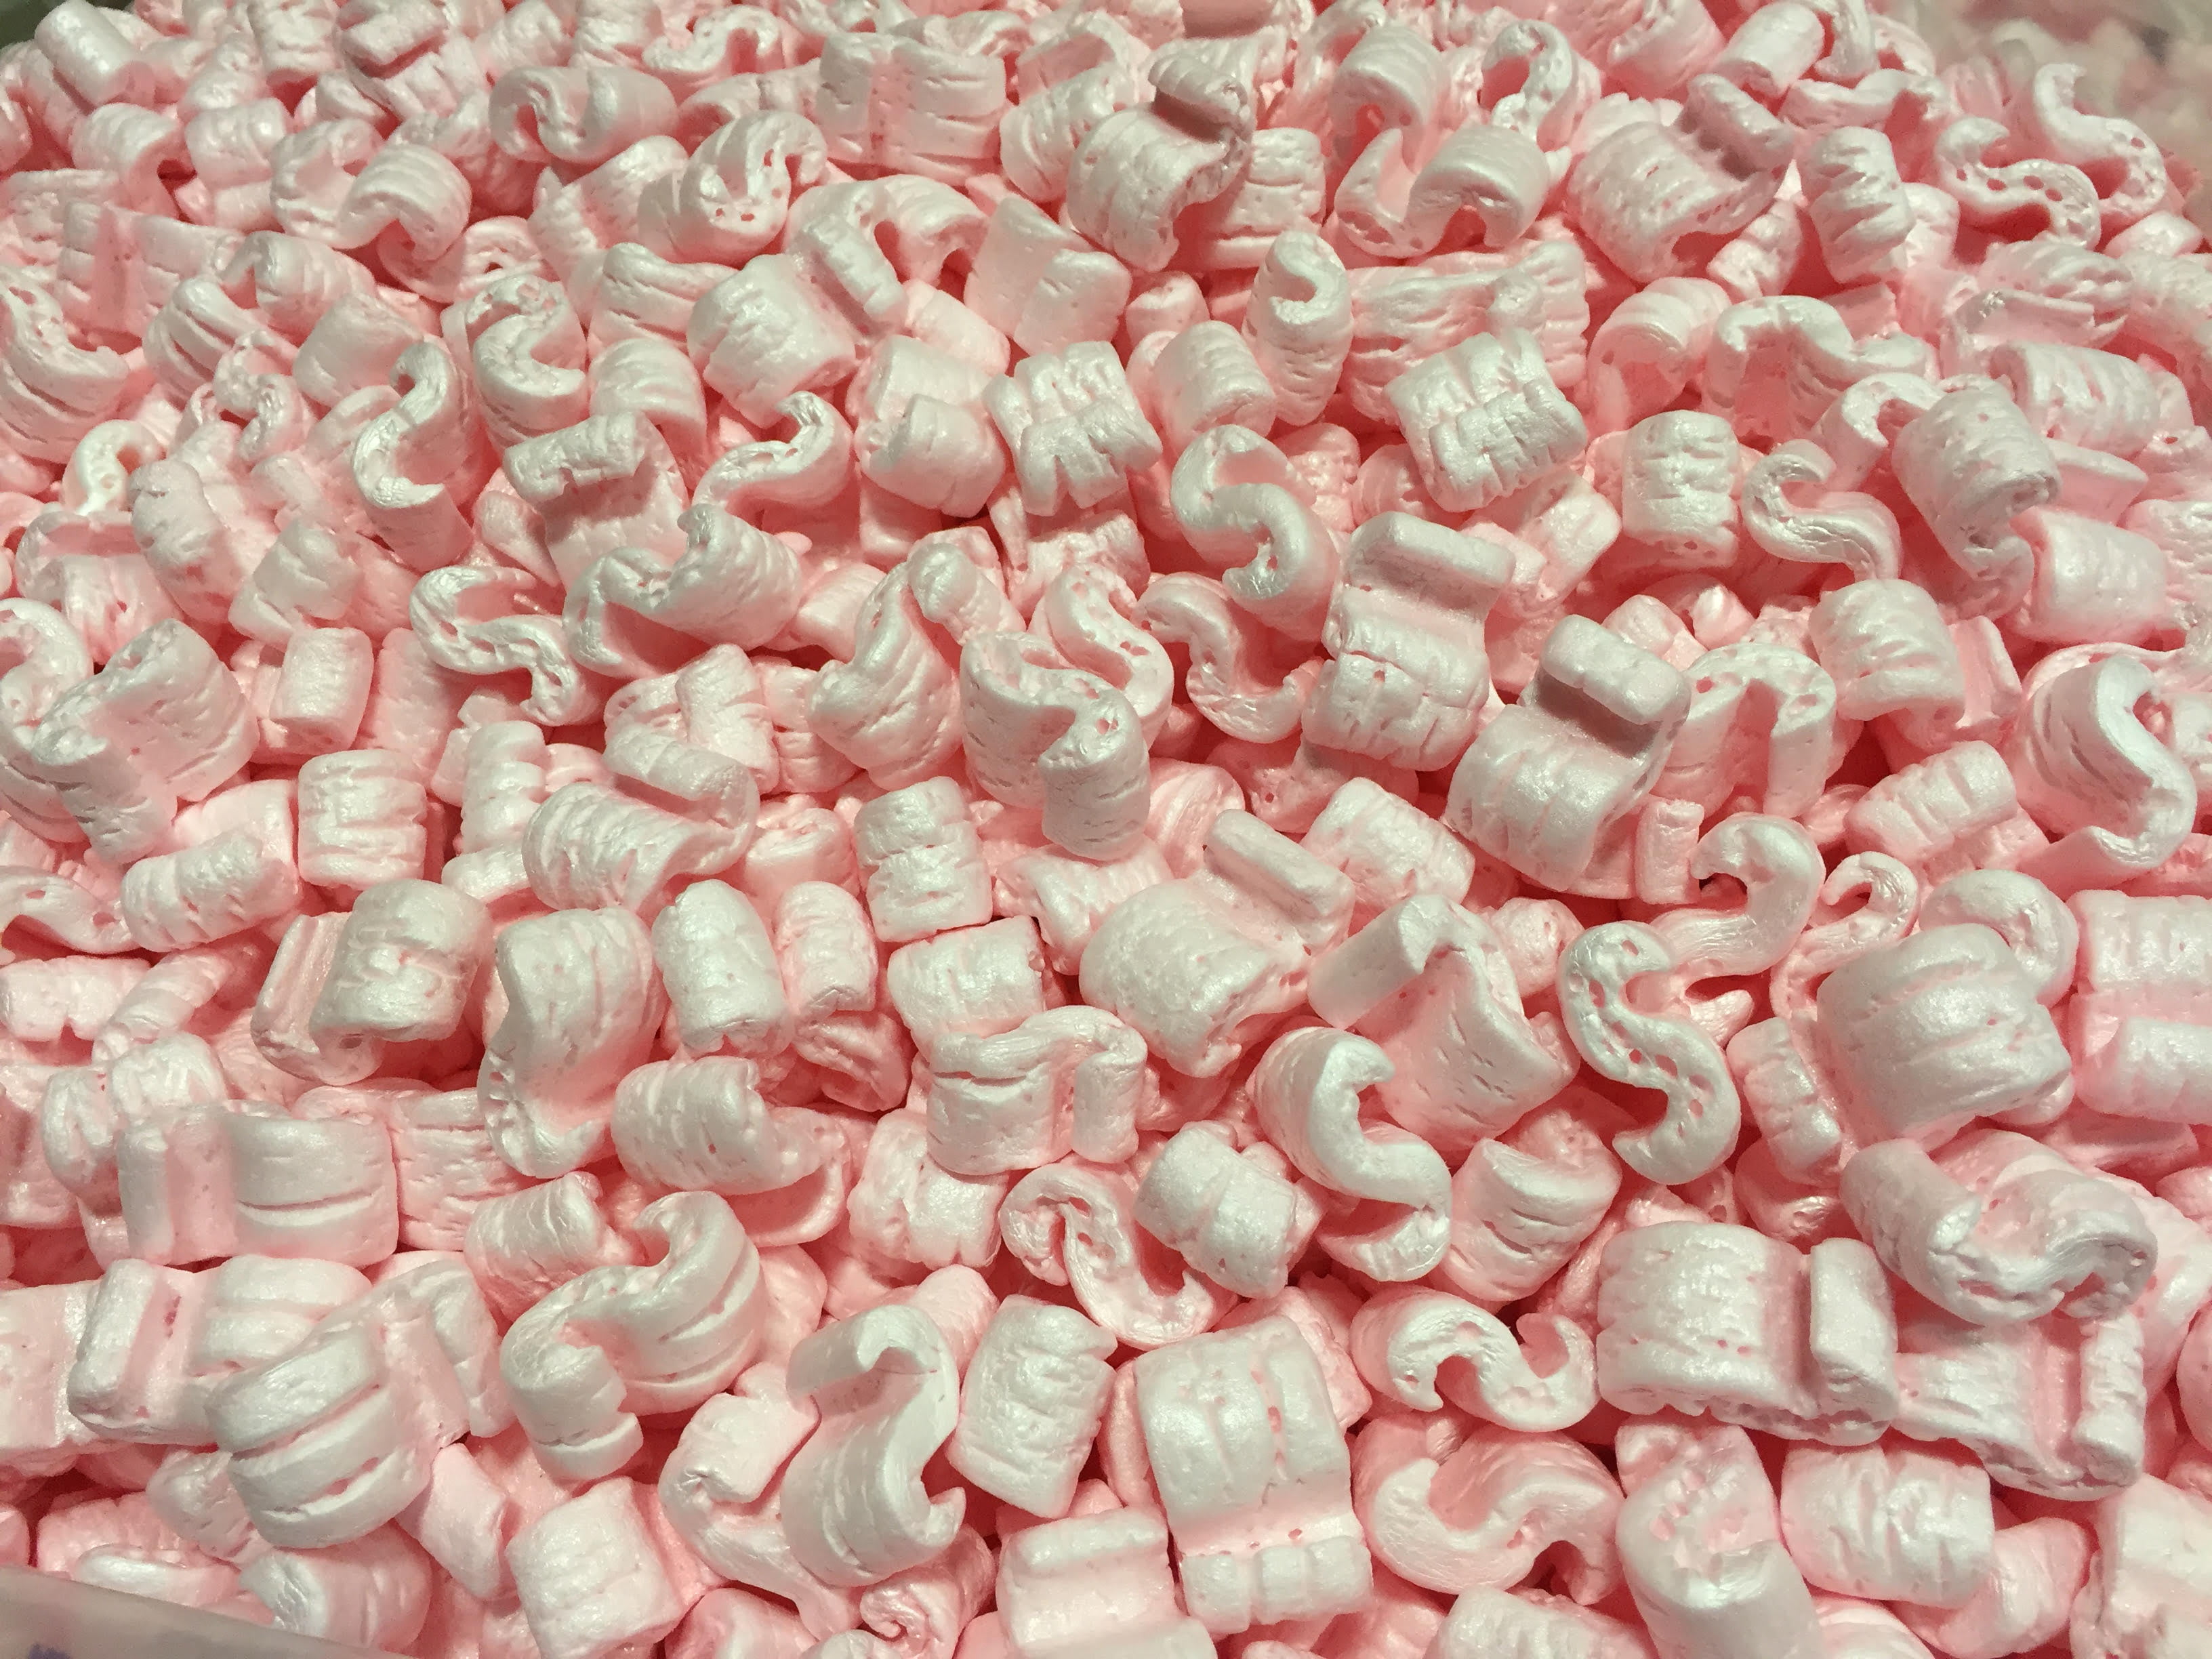 20 Cubic Feet 150 Gallon LOT OF 3 Bags Free Shipping Loose Fill Packing Peanuts 